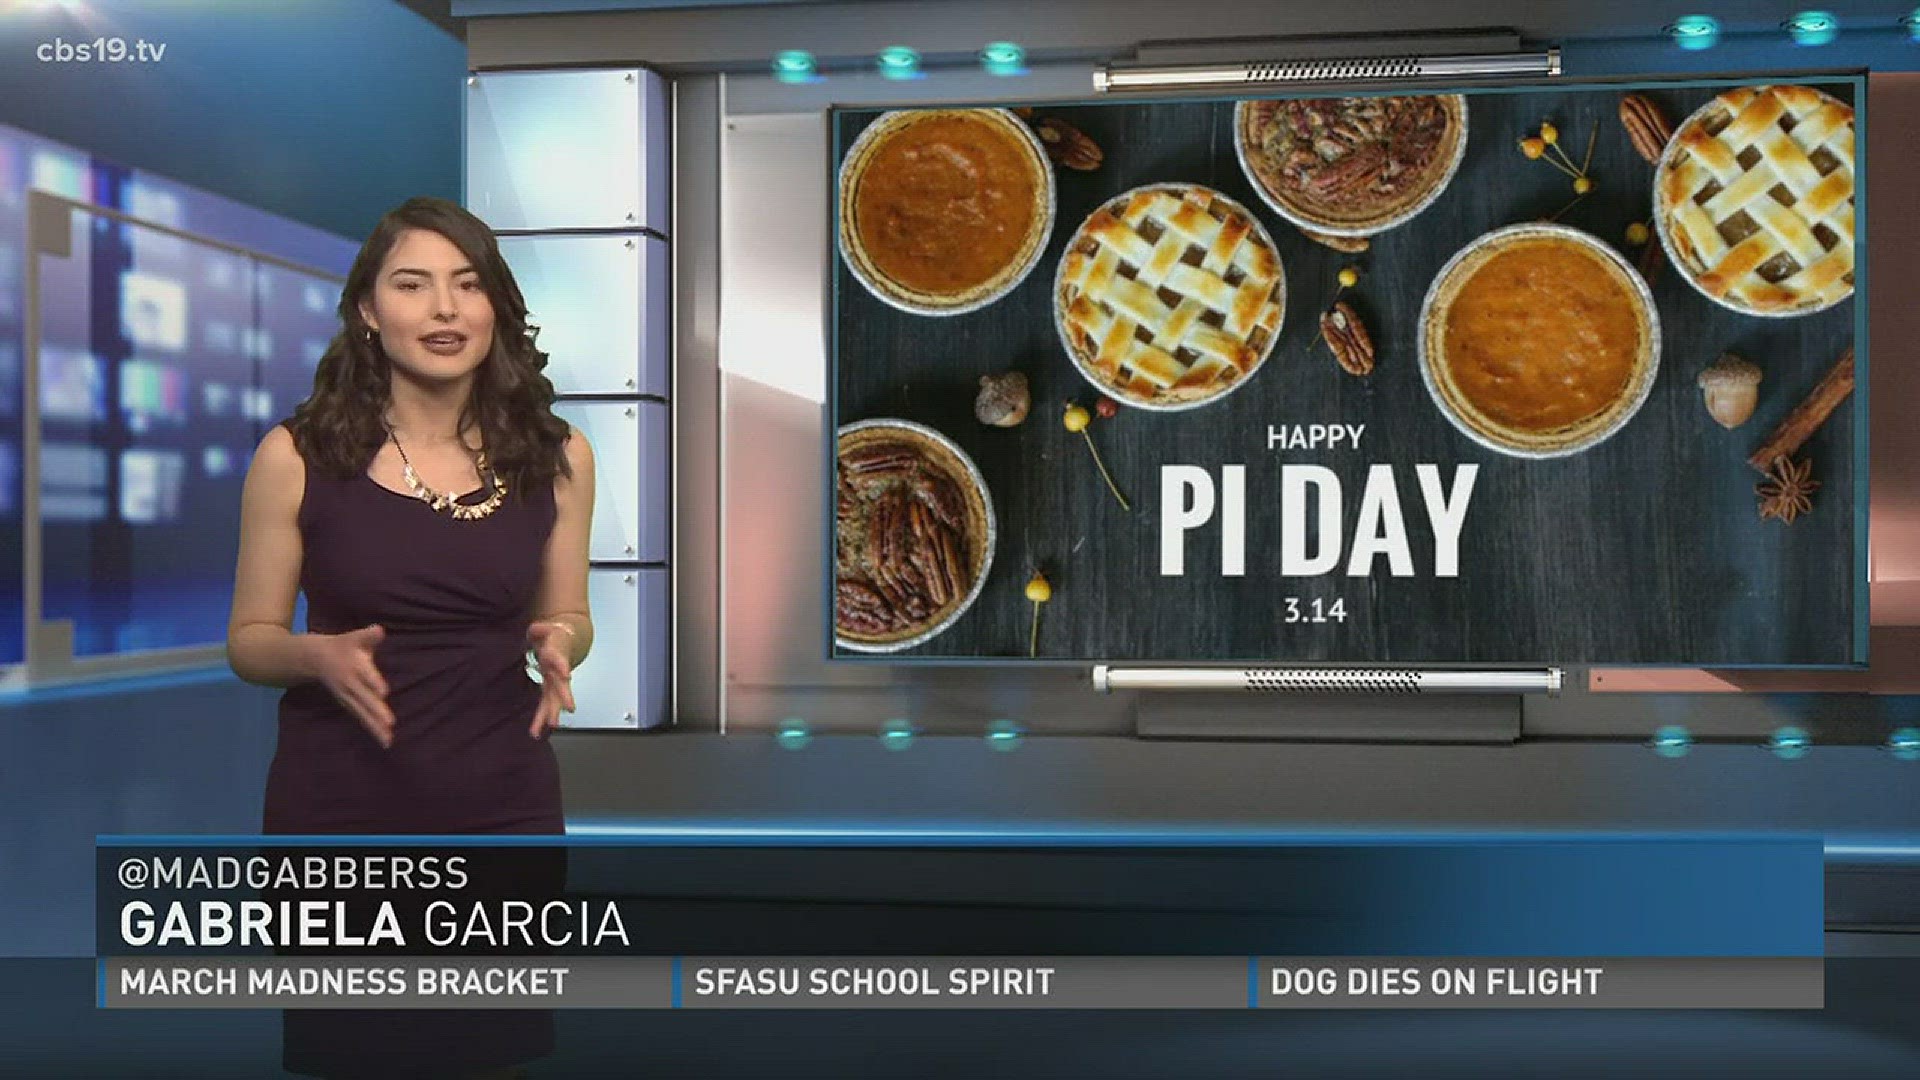 Twitter users celebrate Pi Day!